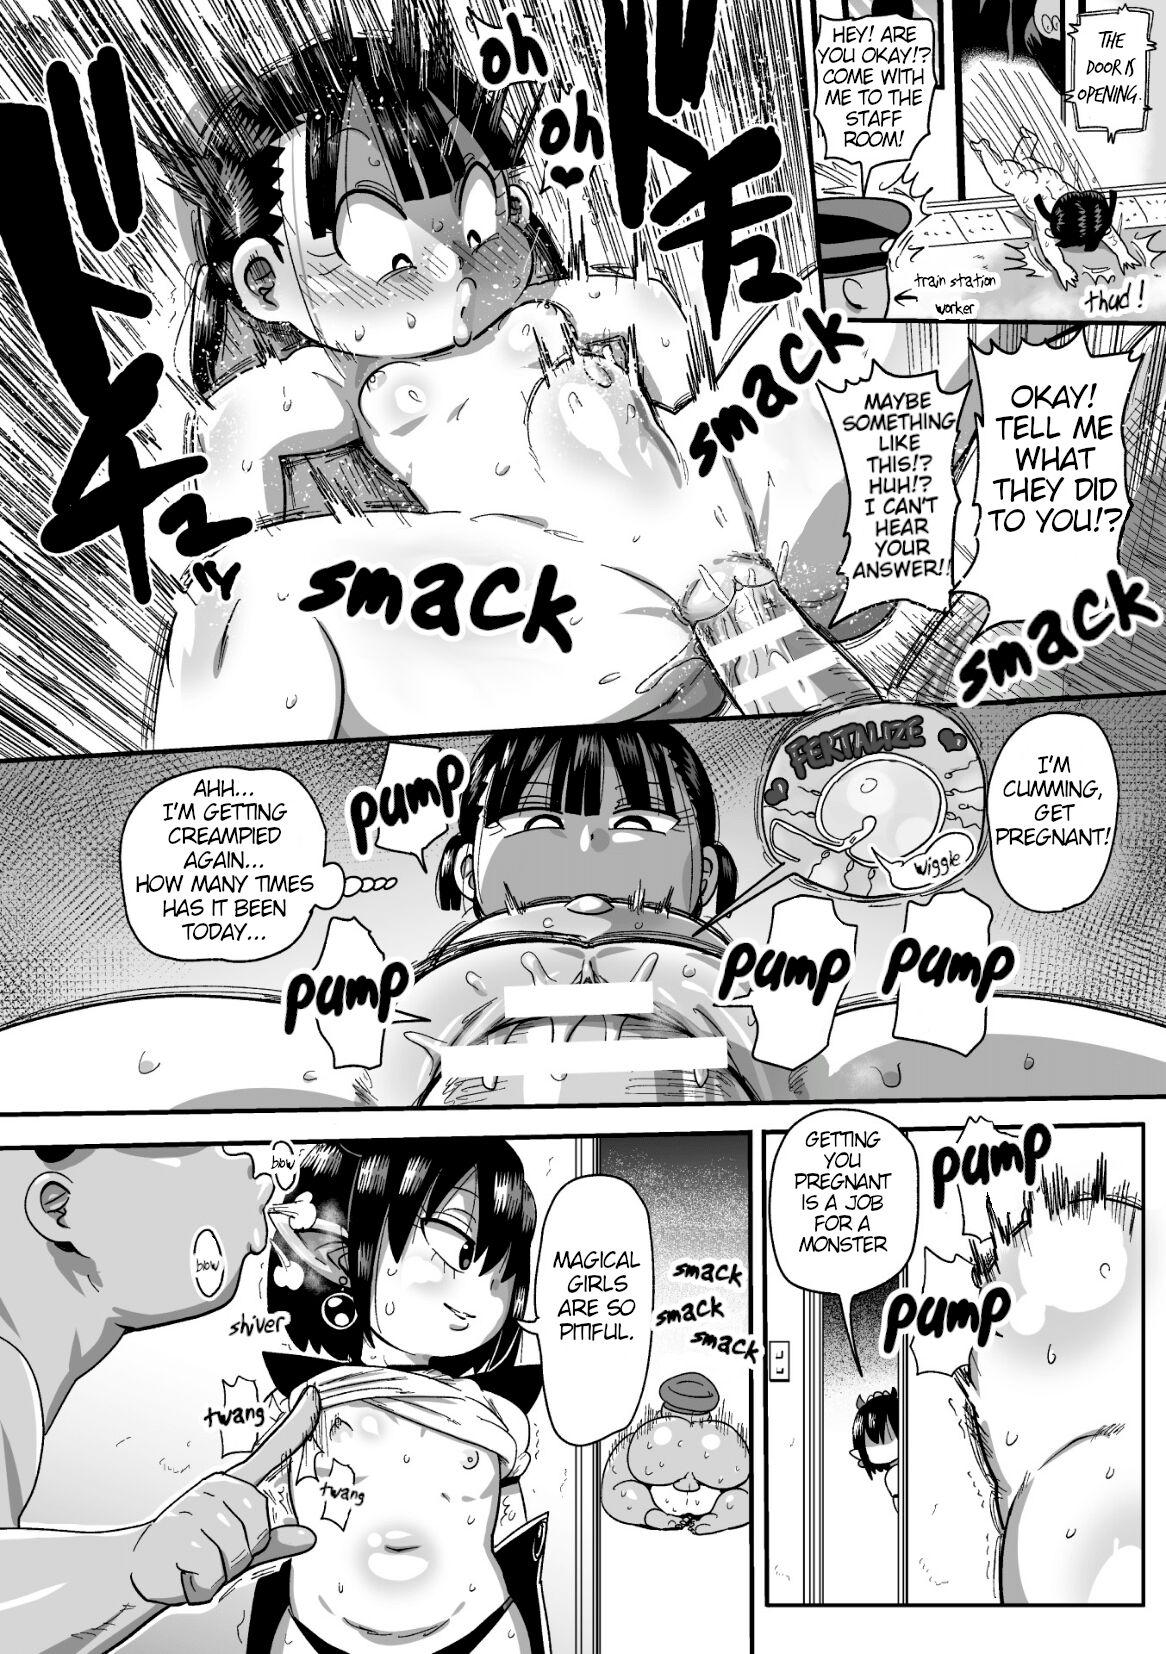 Thick Magical Girl In Training - Ana Ch. 3 | Yousei no Mahou Shoujo Anna Ch. 3 - Original Strap On - Page 10